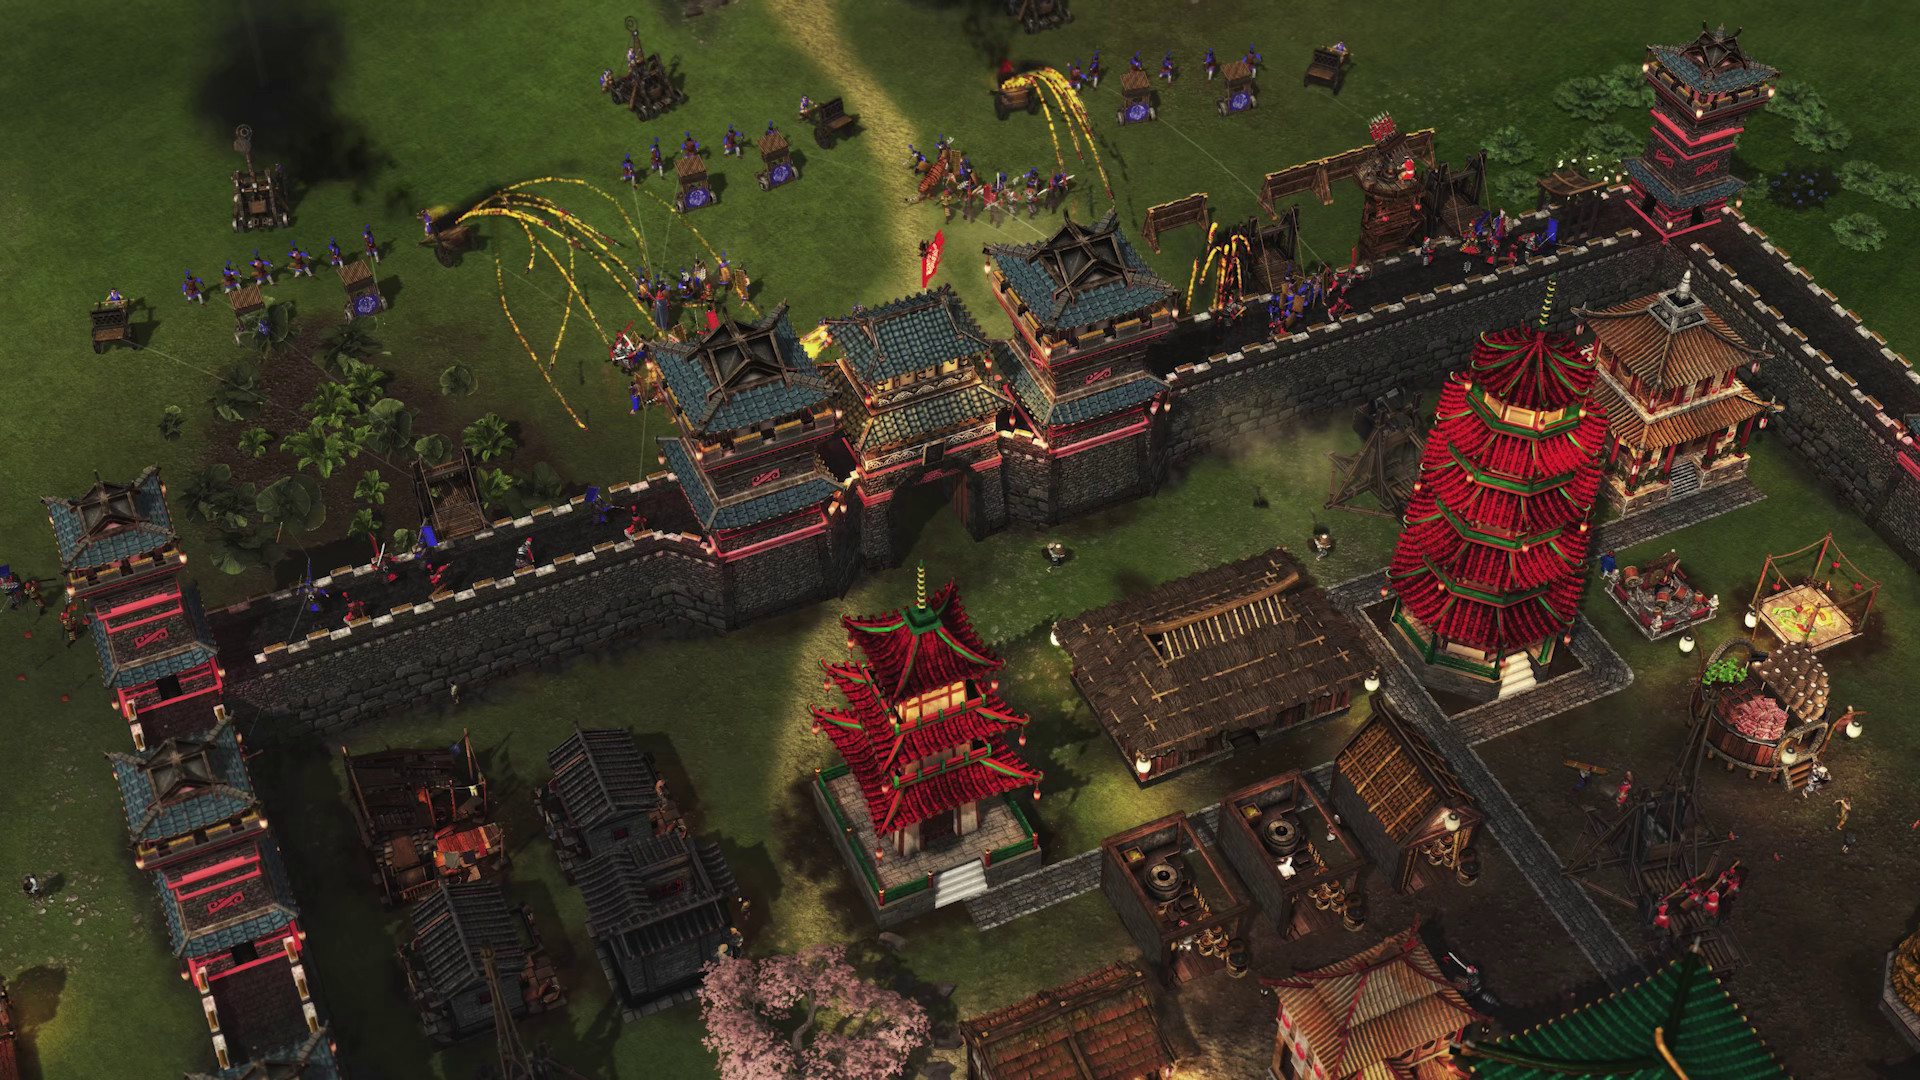 Stronghold: Warlords’ next AI lord is Kublai Khan, who enjoys life’s finer things